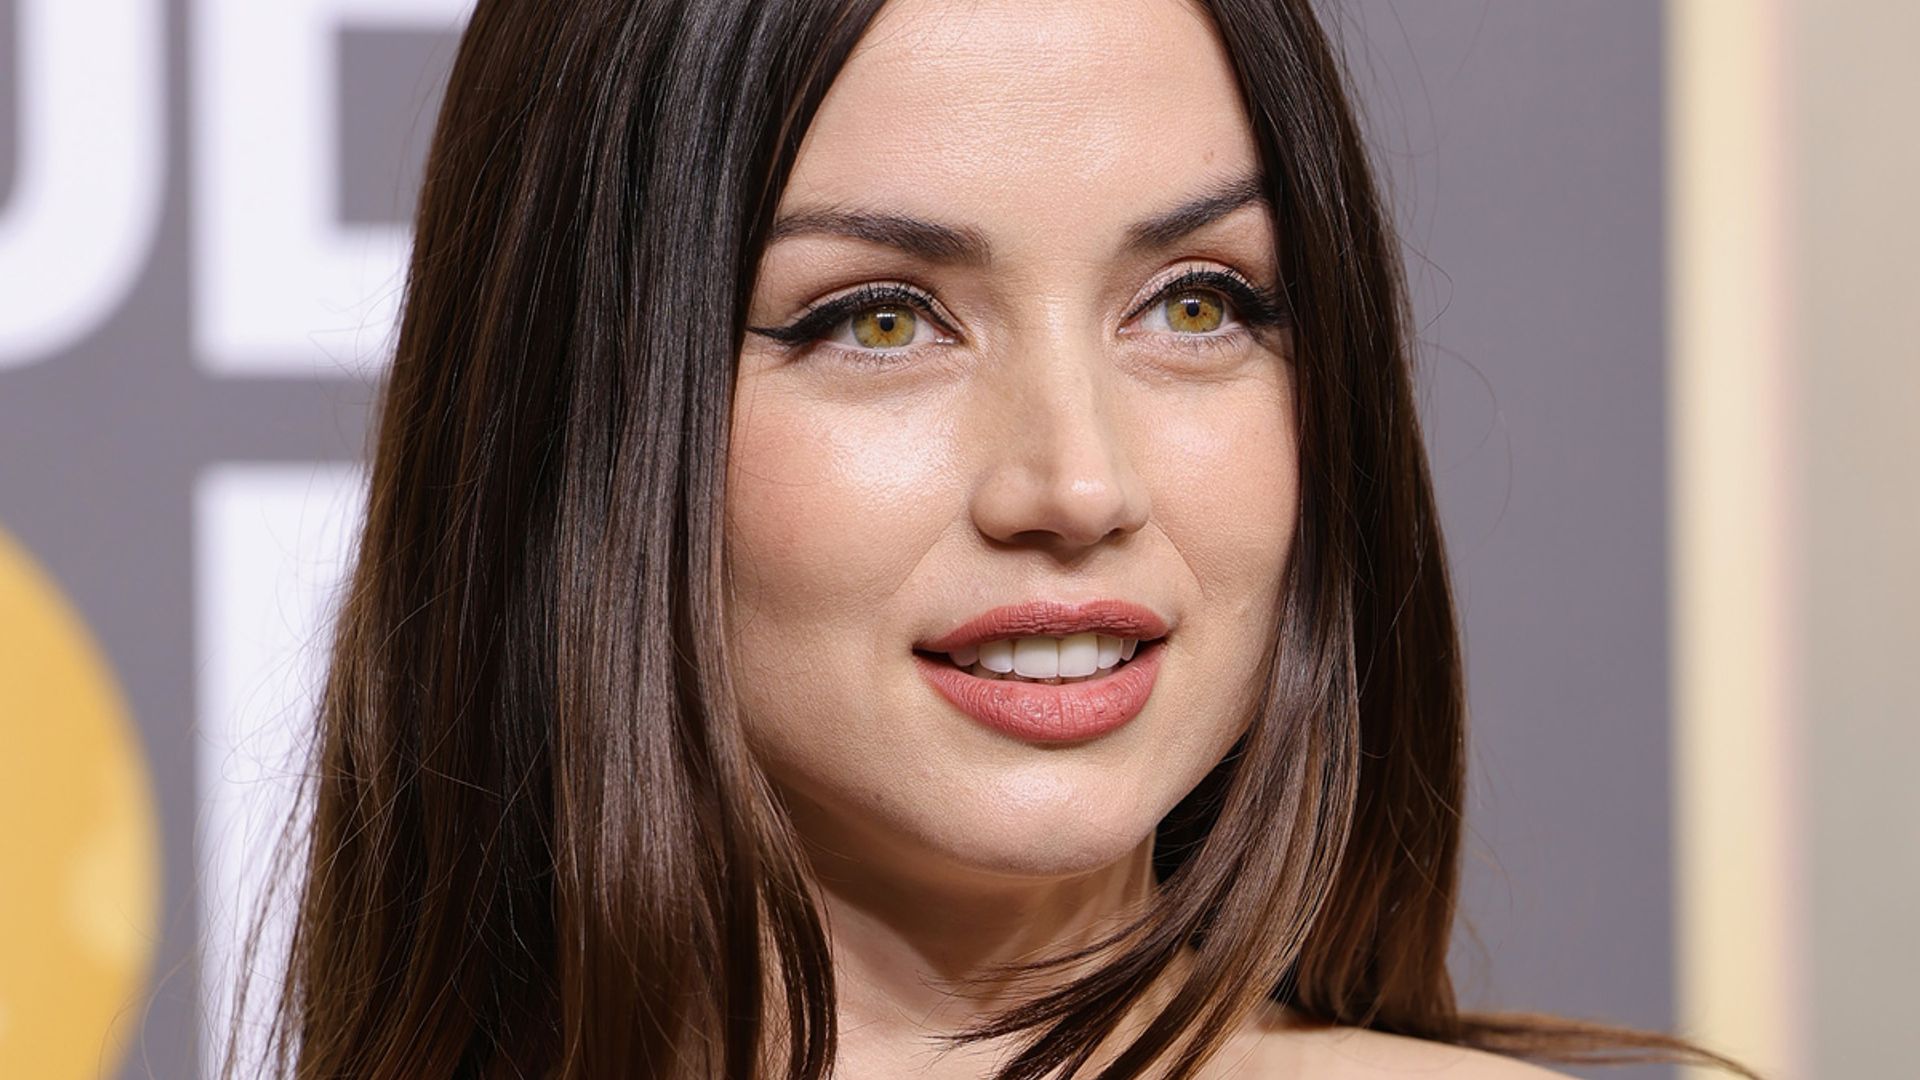 Ana de Armas' Best Red Carpet Looks: From Teen Star to Hollywood Glam